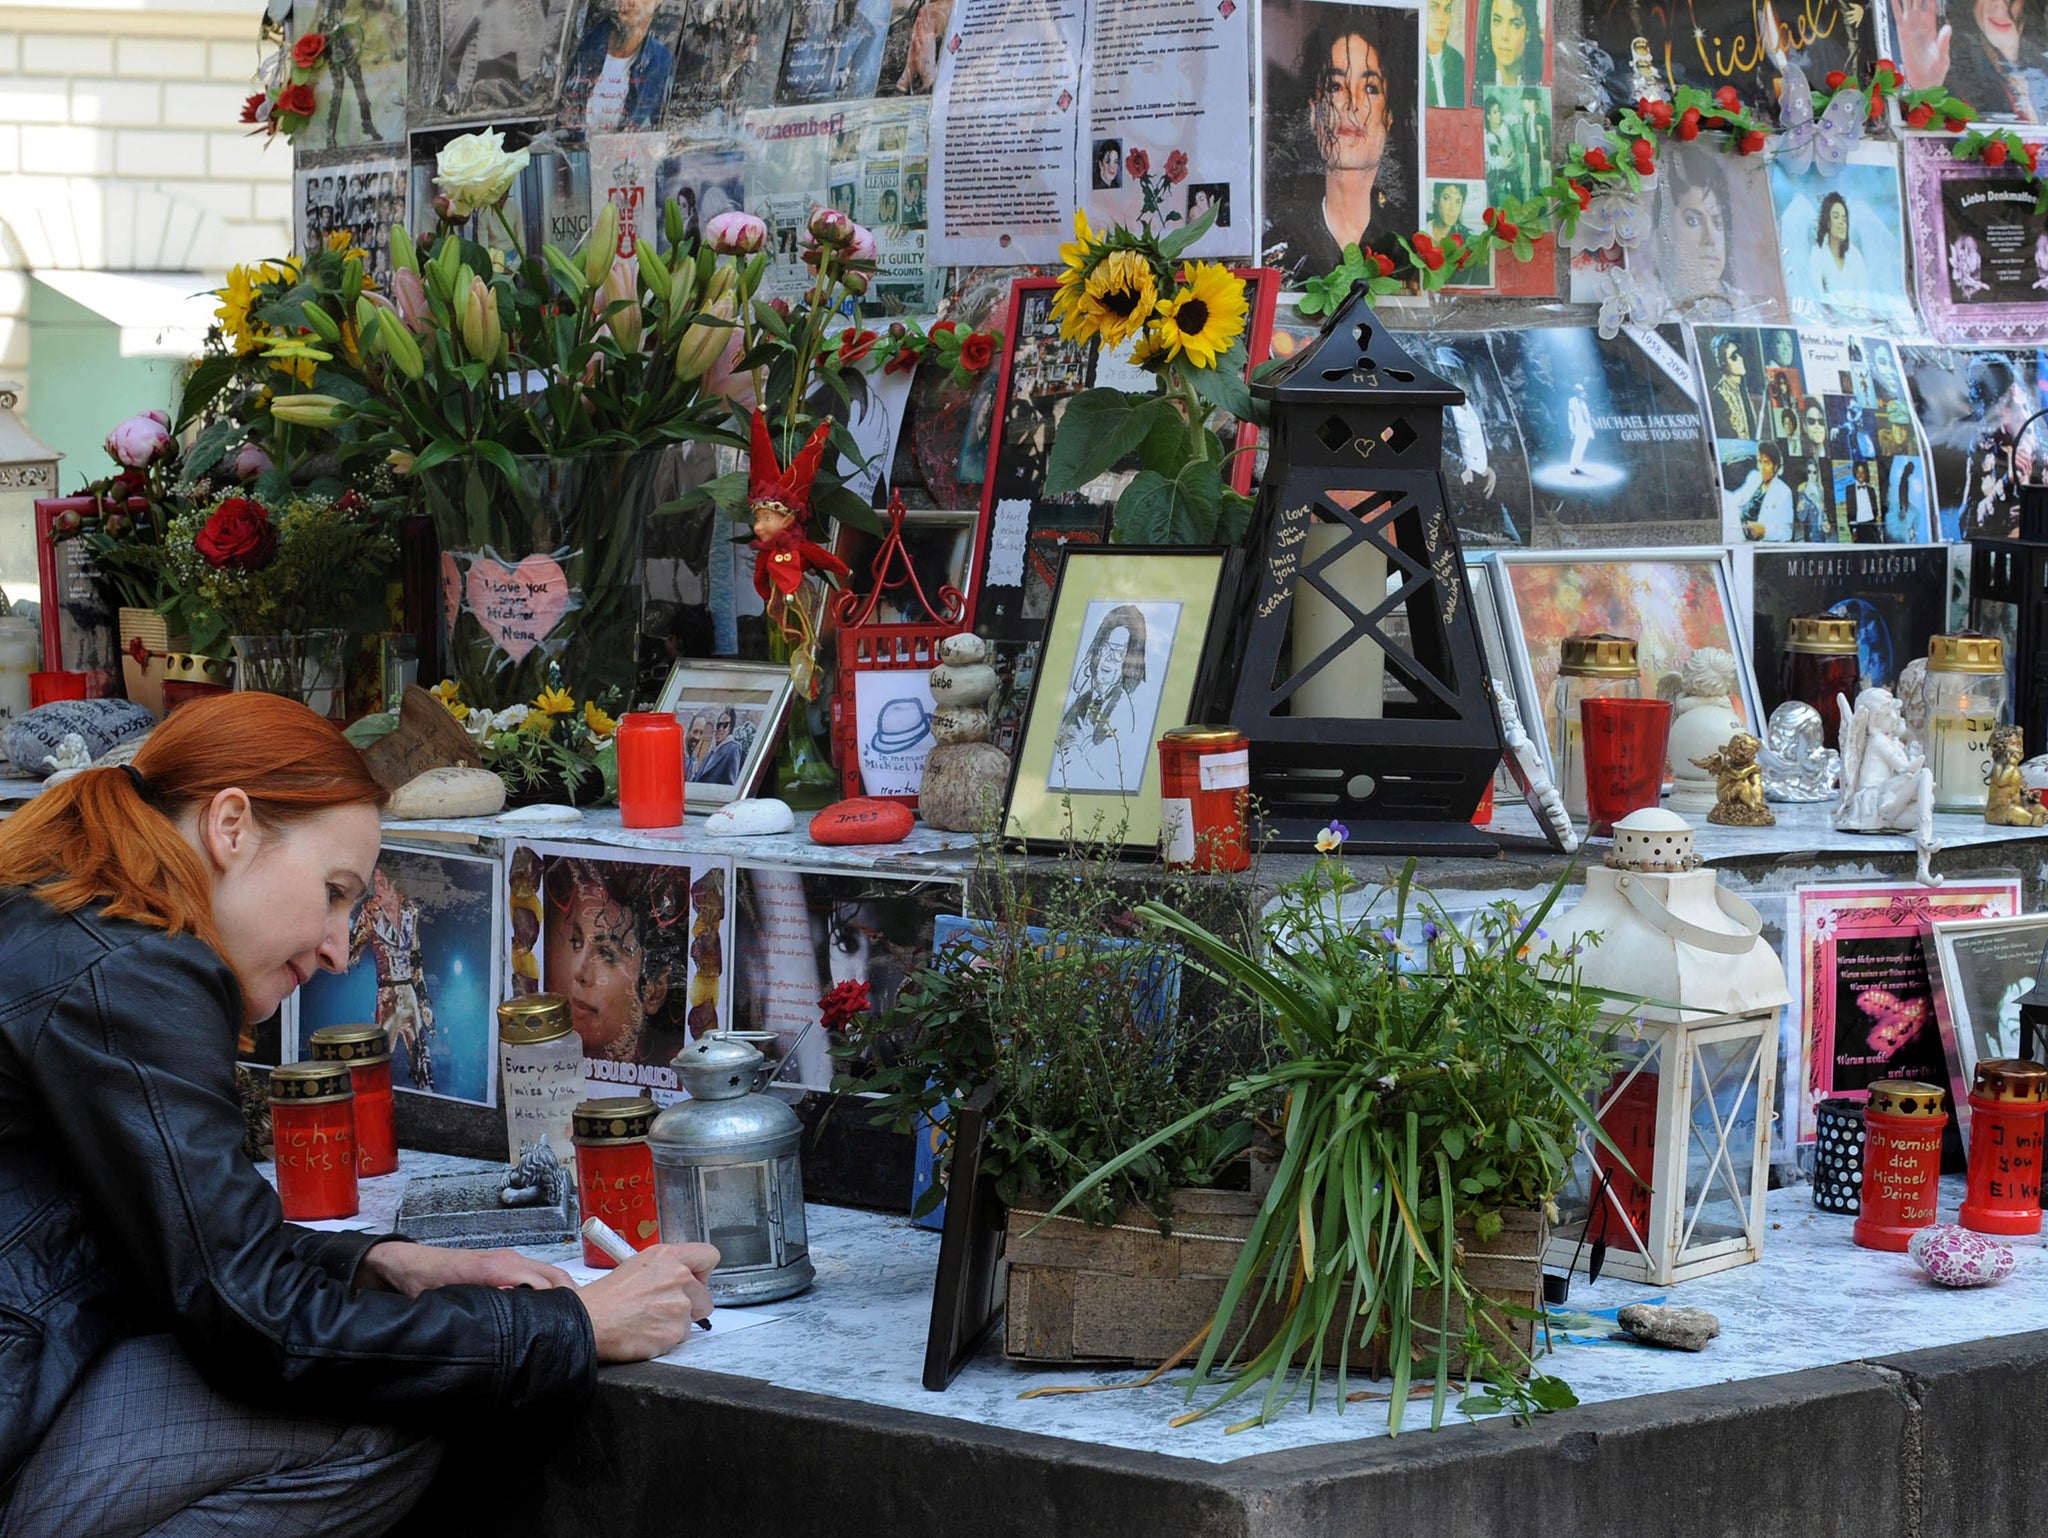 A woman kneels beside flowers, letters and pictures of the King of Pop Michael Jackson which are fixed on a monument dedicated to Franco-Flemish Renaissance composer Orlando di Lasso in Munich